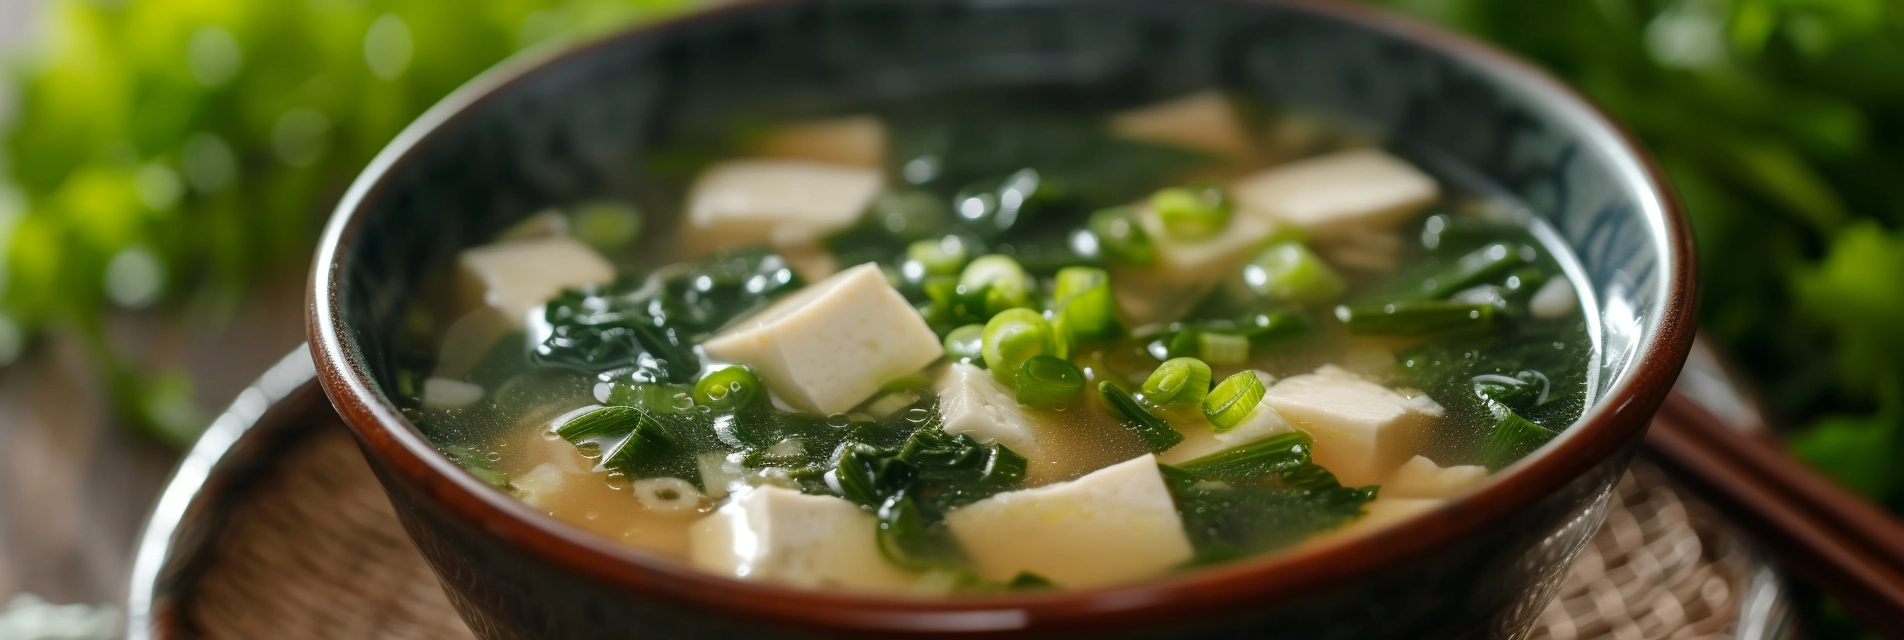 Close-up of a steaming hot bowl of miso soup, showing the rich, cloudy broth with dissolved miso paste, and visible bits of green onion and seaweed floating on the surface, evoking a sense of warmth and nourishment.